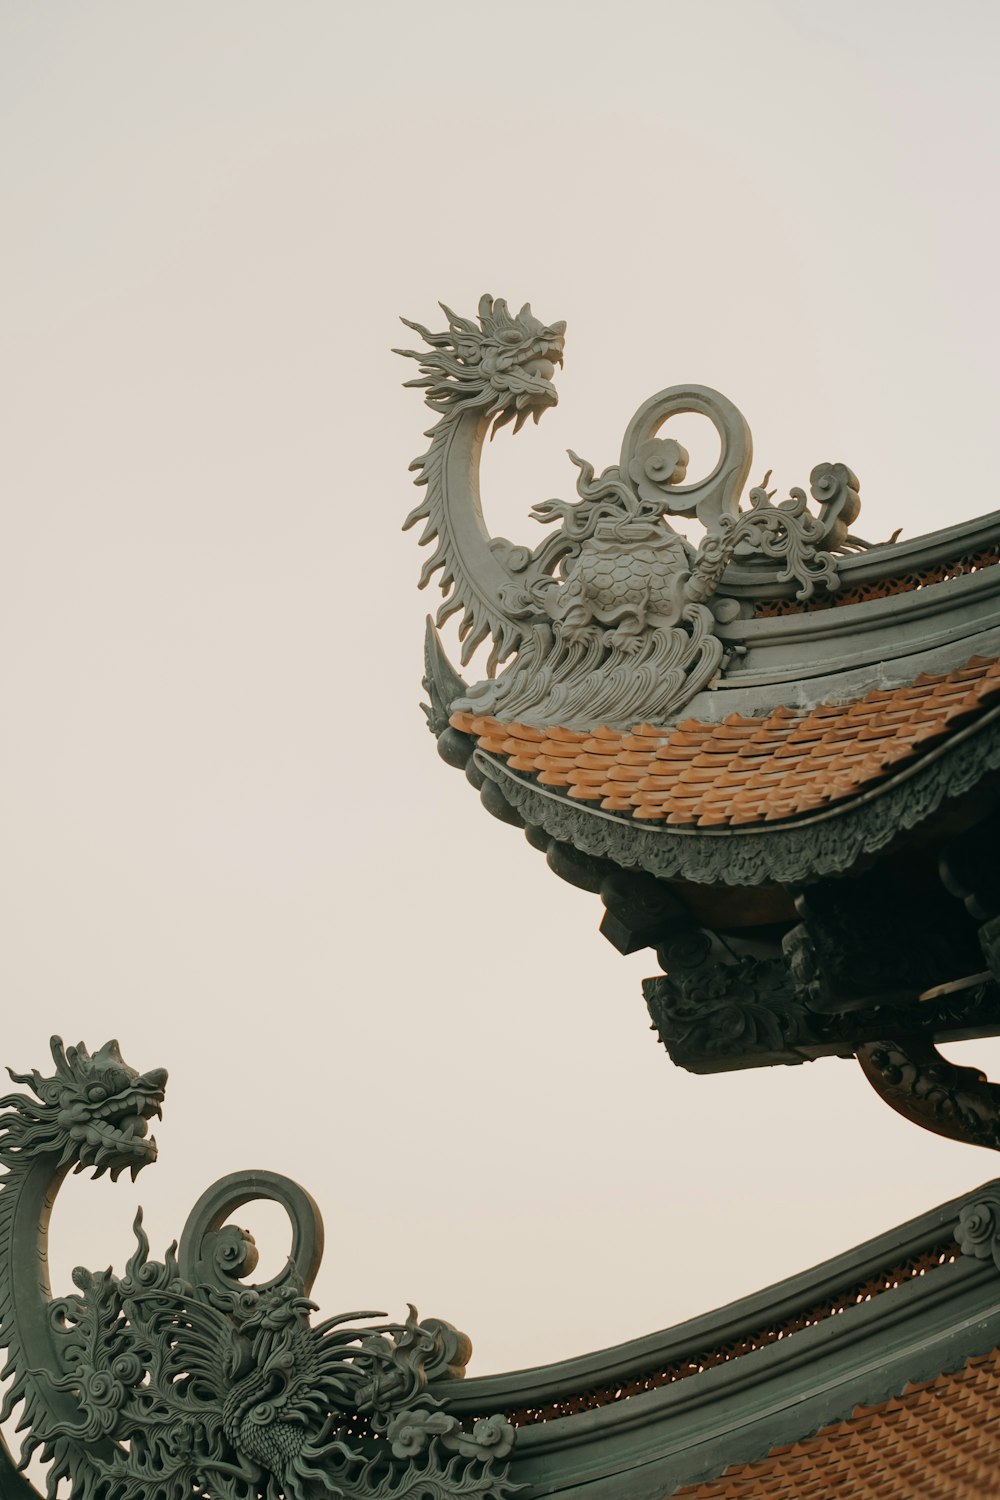 a close up of a roof with a dragon on it